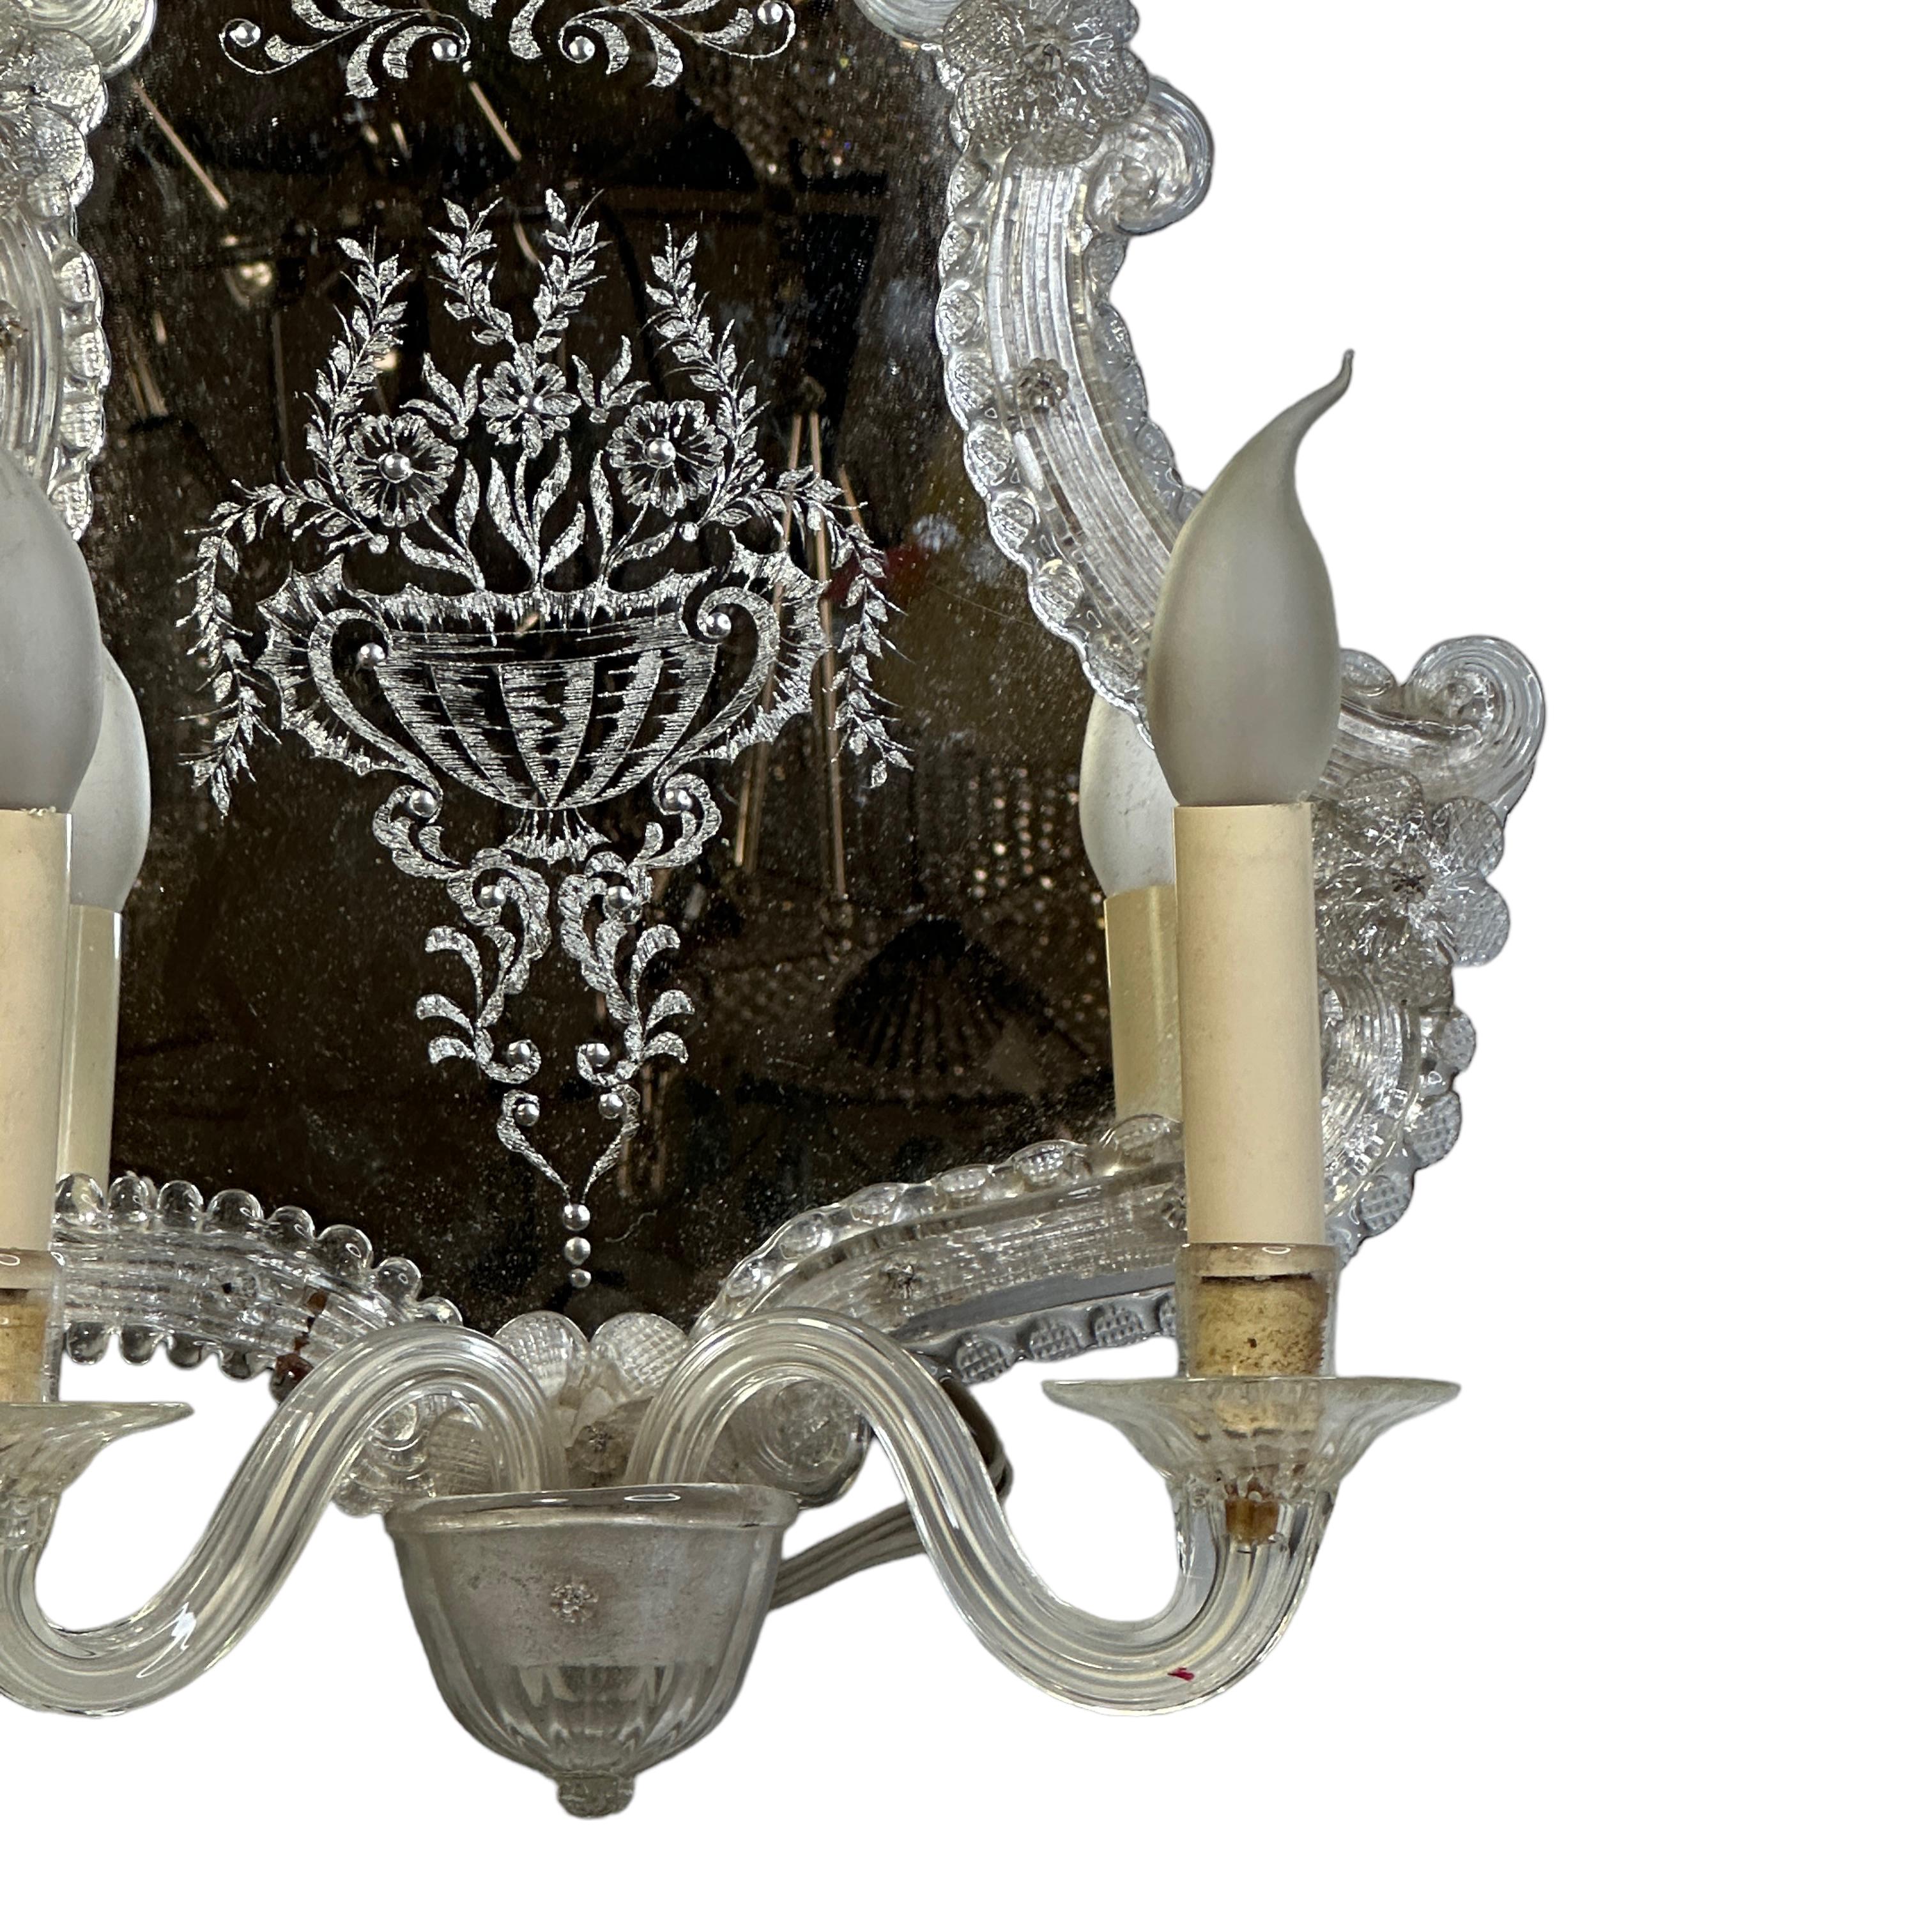 Venetian Etched Murano Glass Mirror Sconce, circa 1950s Italy Vintage For Sale 3